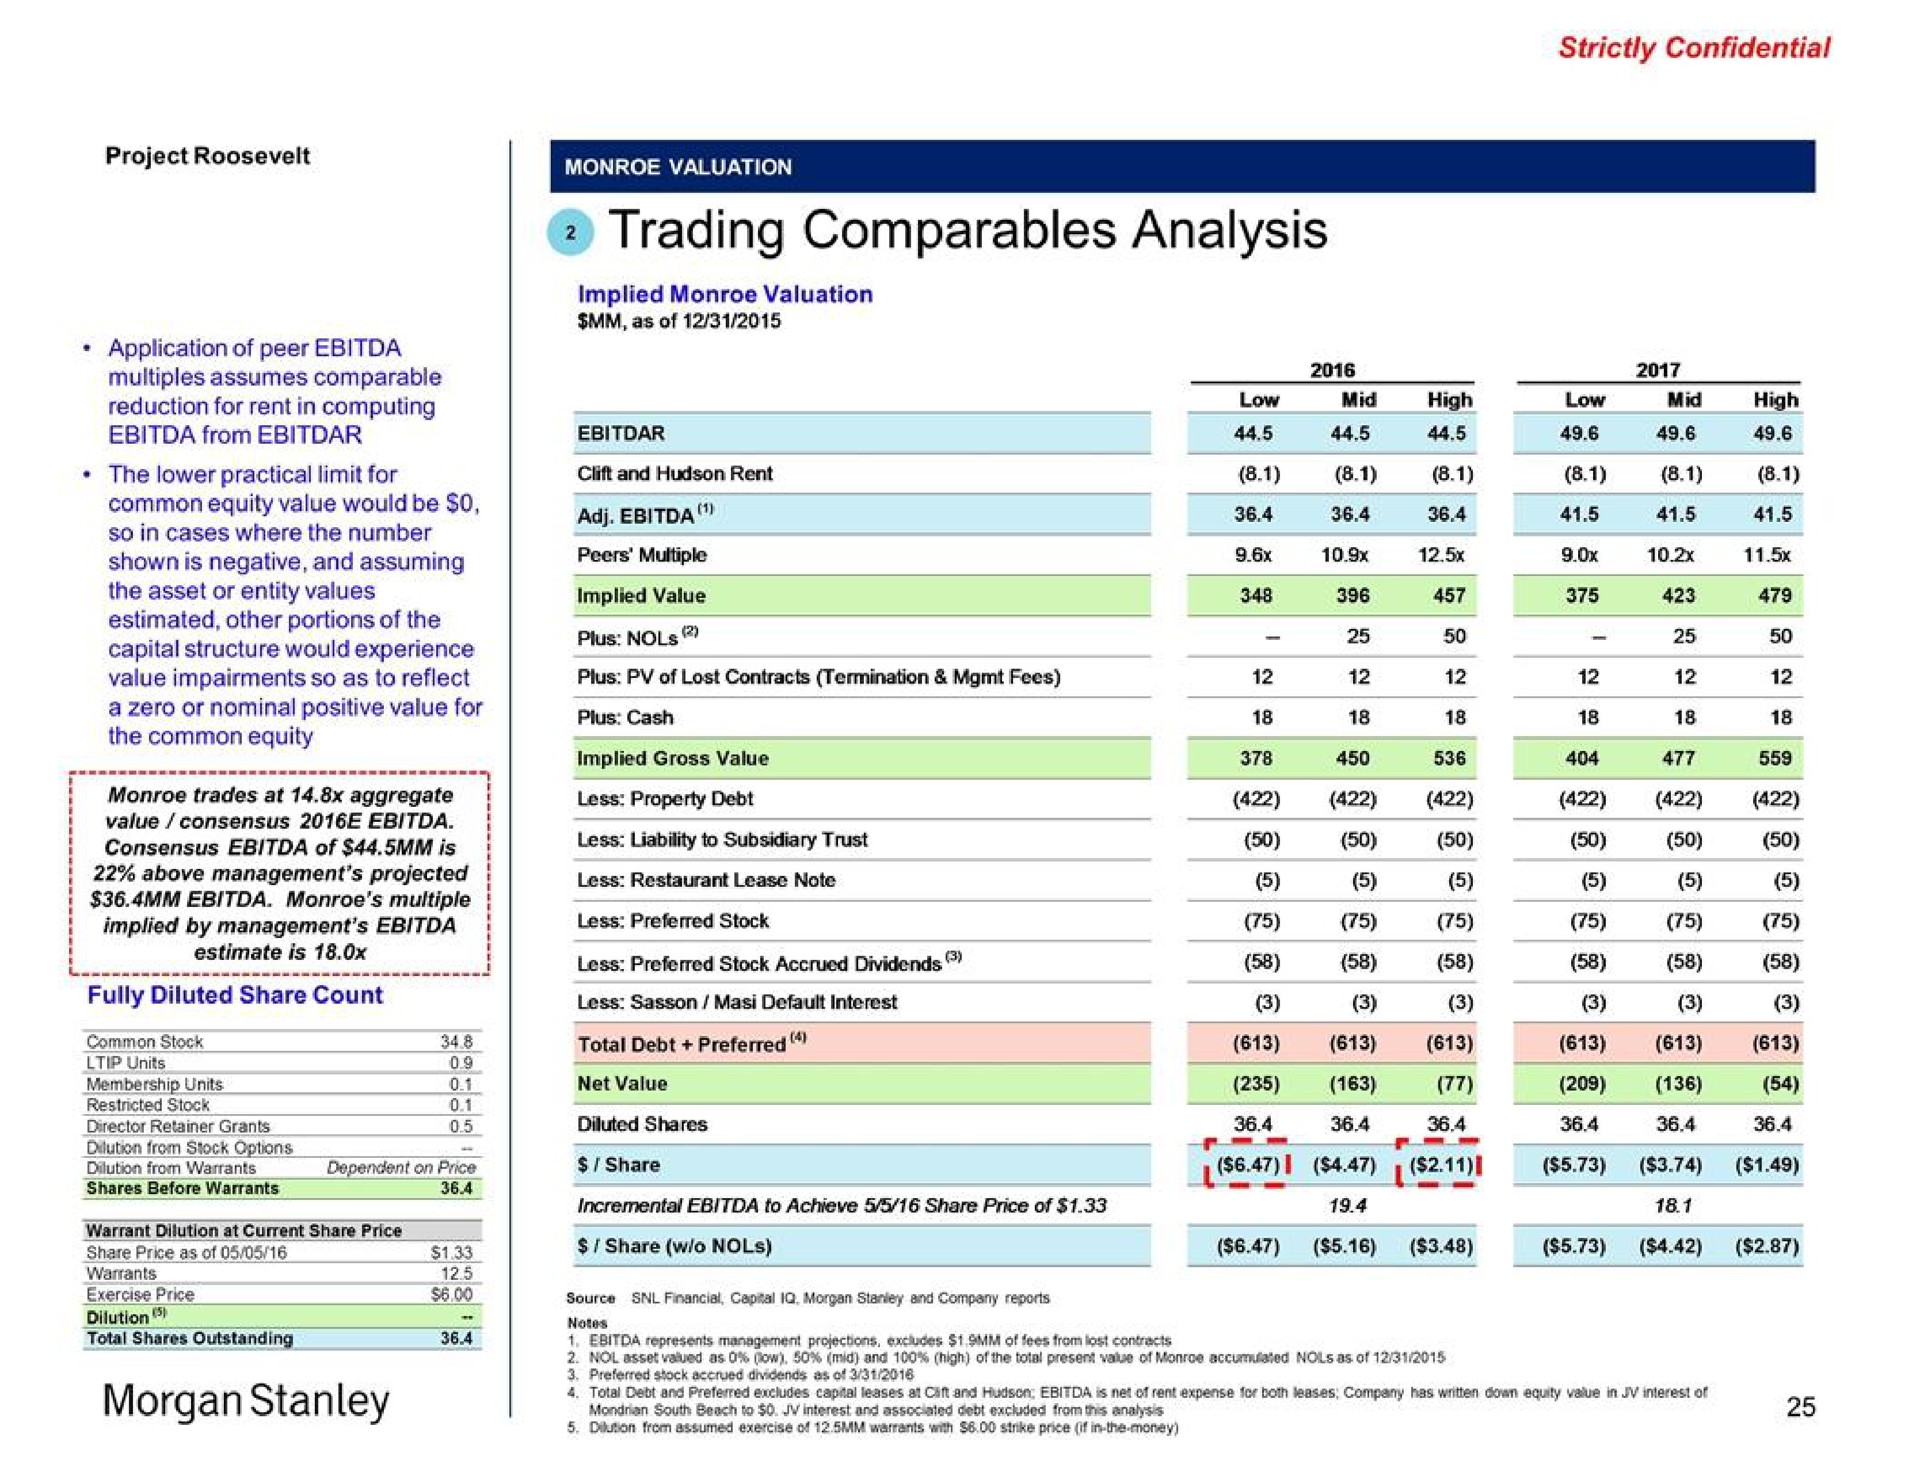 trading analysis morgan peers multiple implied value plus of lost contracts termination fees plus cash less restaurant lease note less preferred stock less default interest total debt preferred net value diluted shares share incremental to achieve share price of share mid high low i takes mid high low | Morgan Stanley